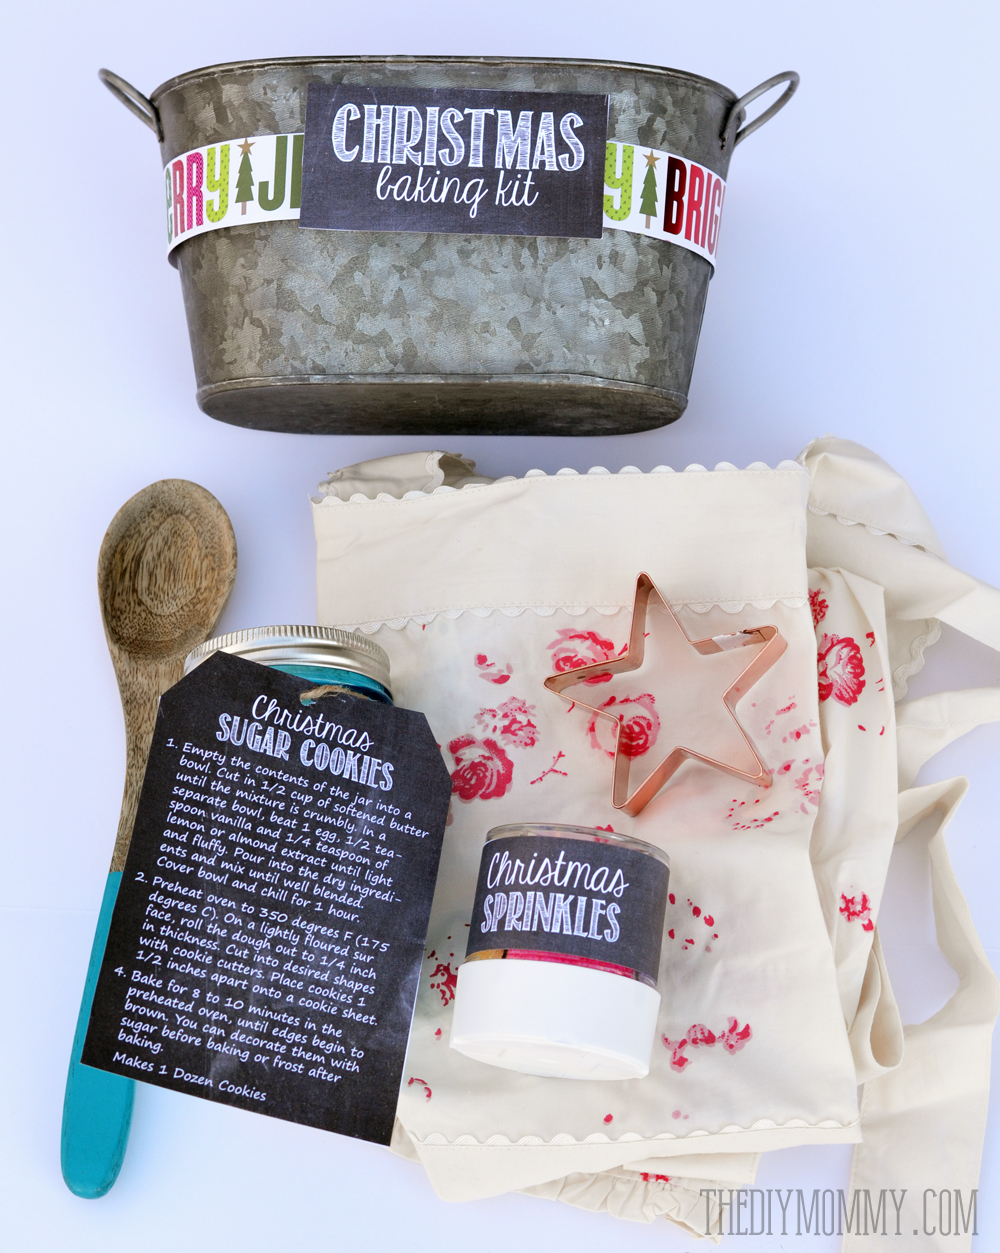 Gift basket idea: A Christmas Baking Kit in a Tin! Put sprinkles, cookie mix, a cookie cutter, a wooden spoon and an apron in a pretty tin for a great gift idea. Comes with free printable labels and tags!